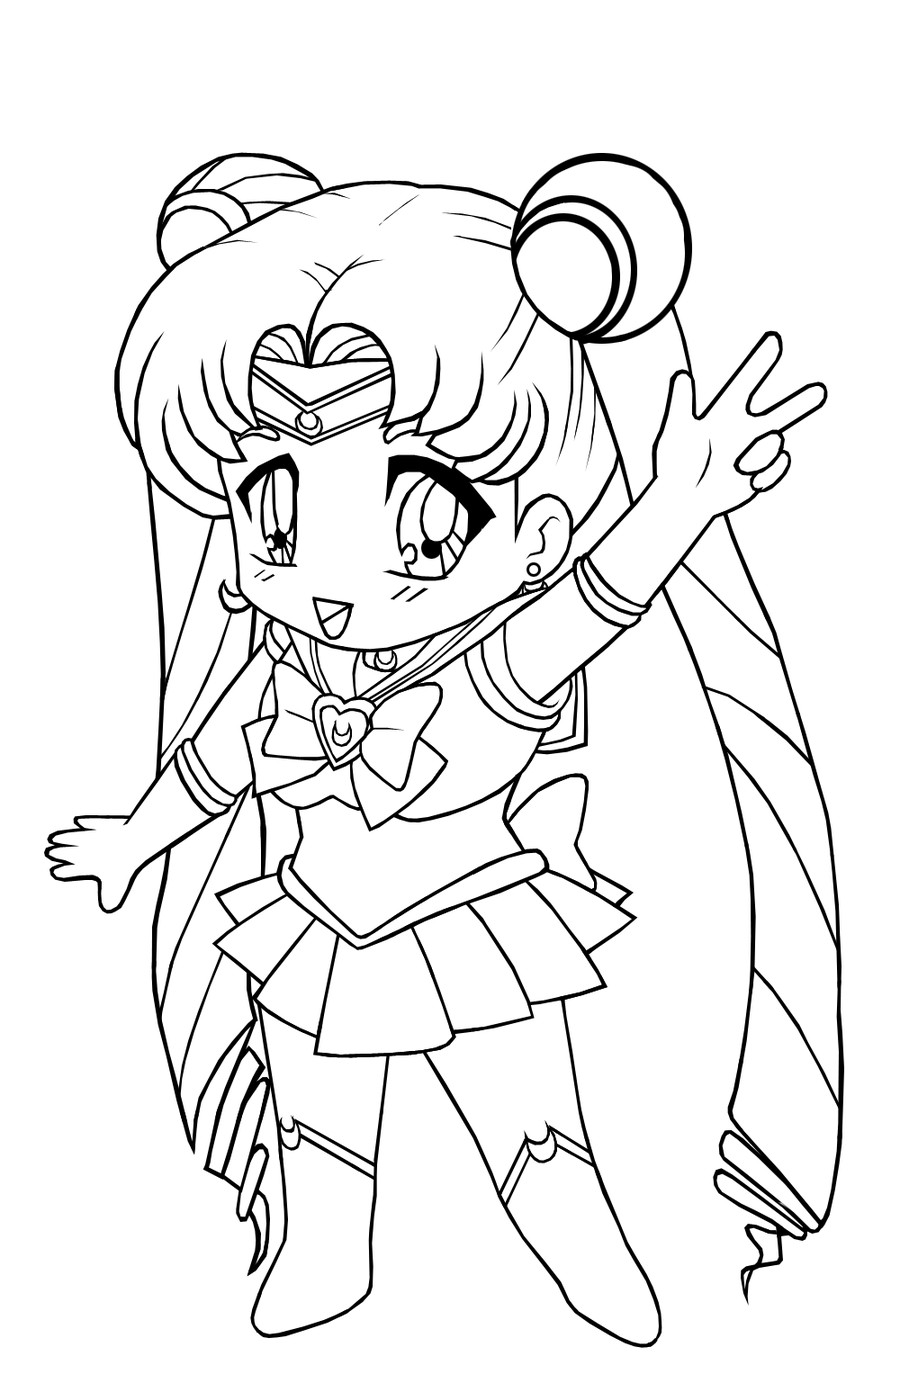 Animated Girl Coloring Pages
 Kids Anime Girl Coloring Pages To Print